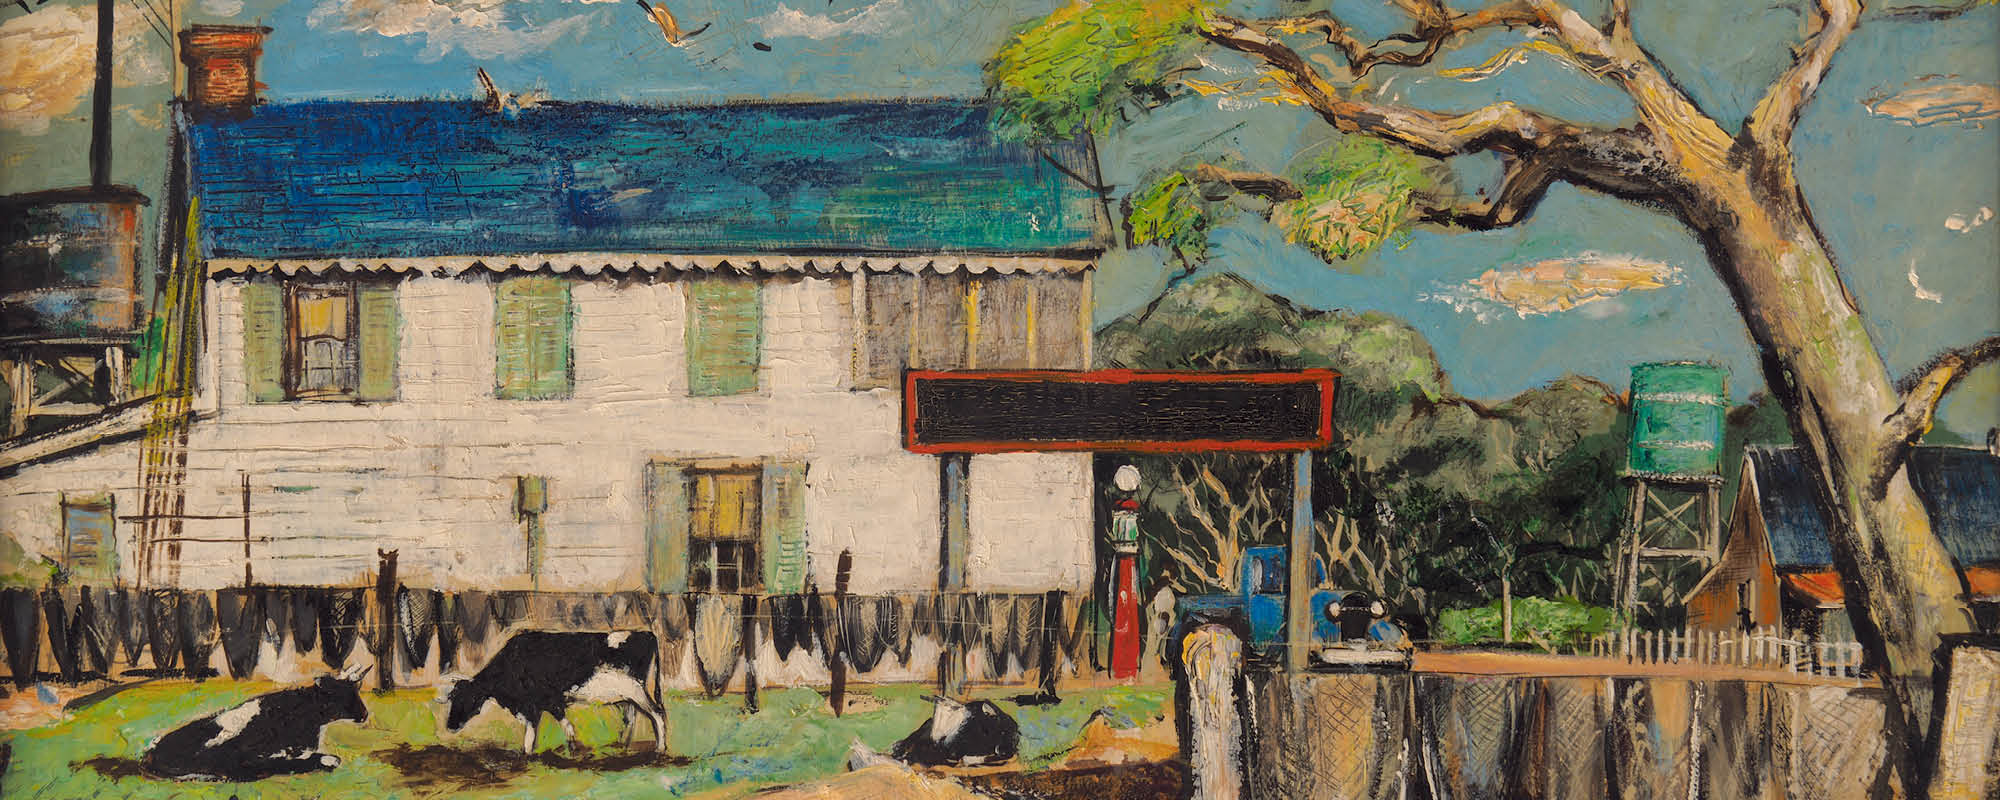 Painting of an old two-story, white house with black and white dairy cows in the front yard, a gas pump, an old blue pickup truck, clothes on the line, a water well, and a barn. 